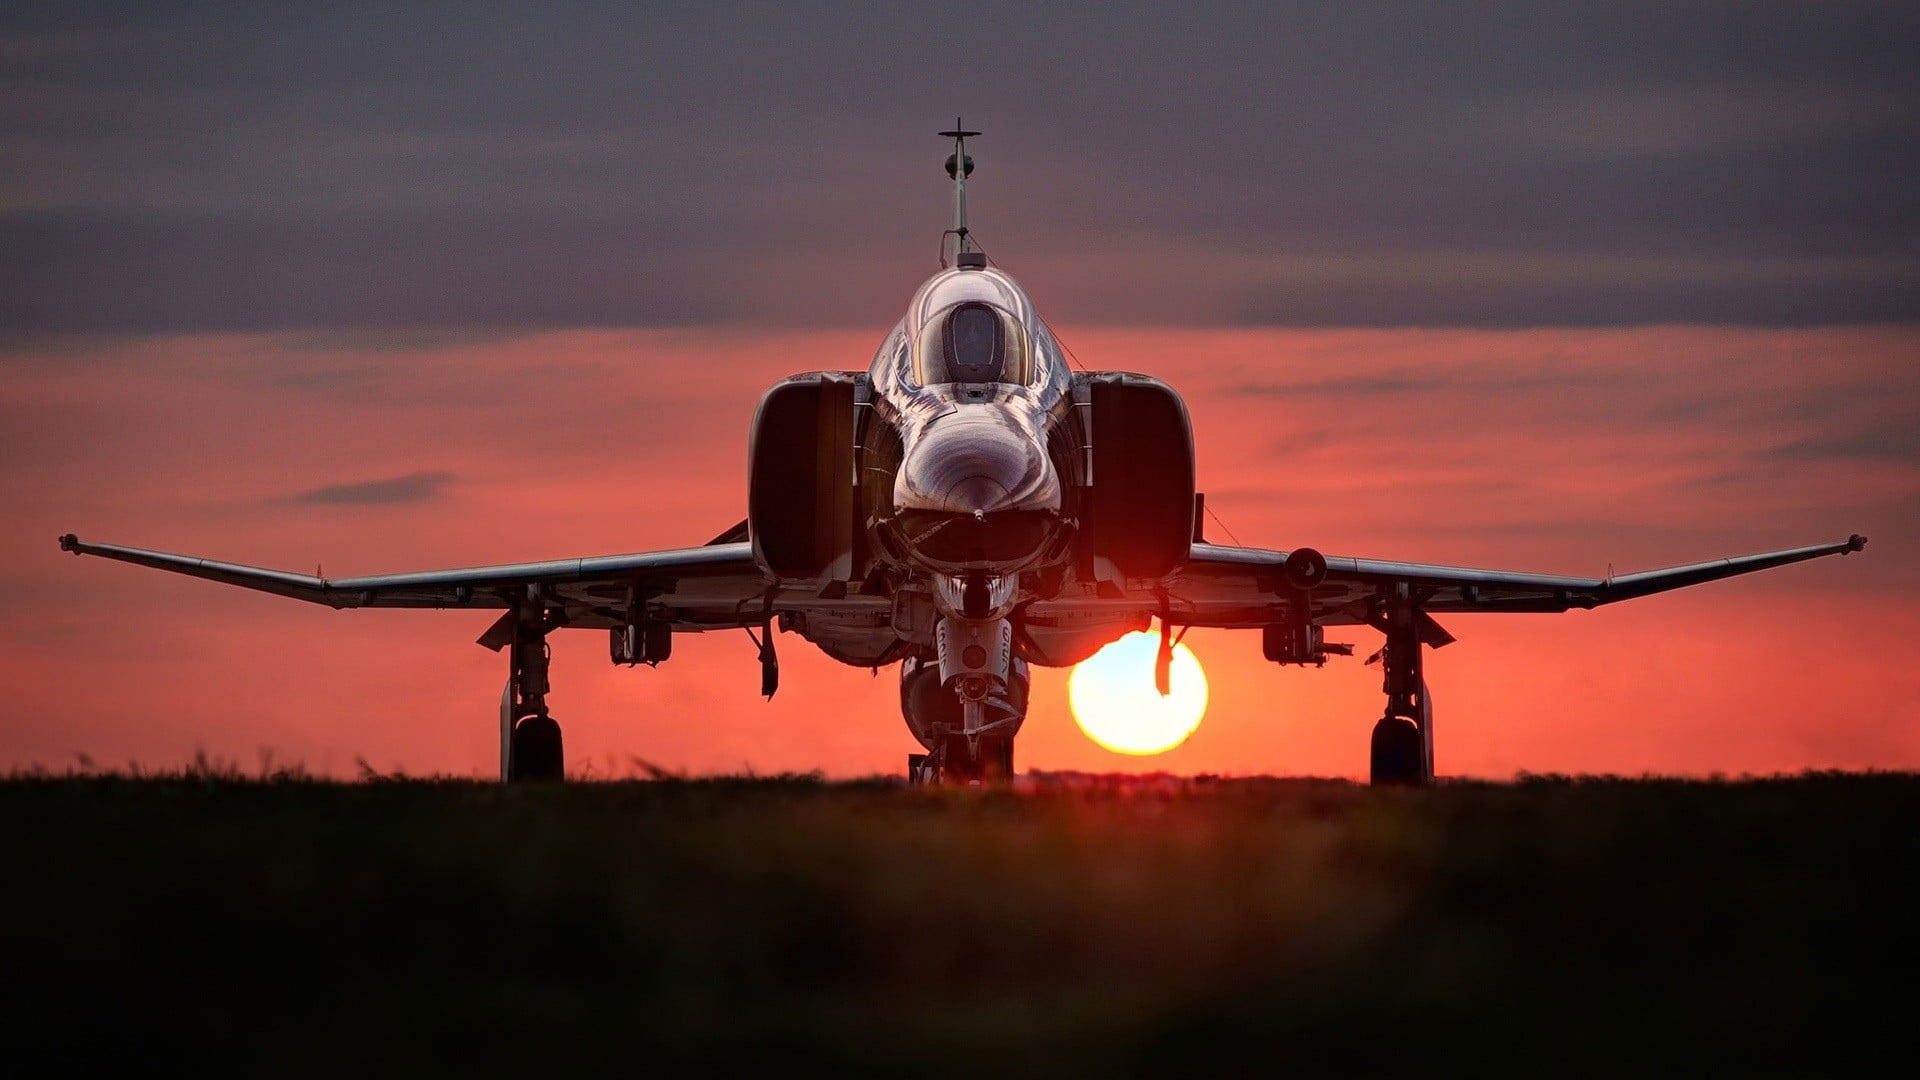 Wallpaper Photography Of Jet Plane During Dawn, Jet Fighter